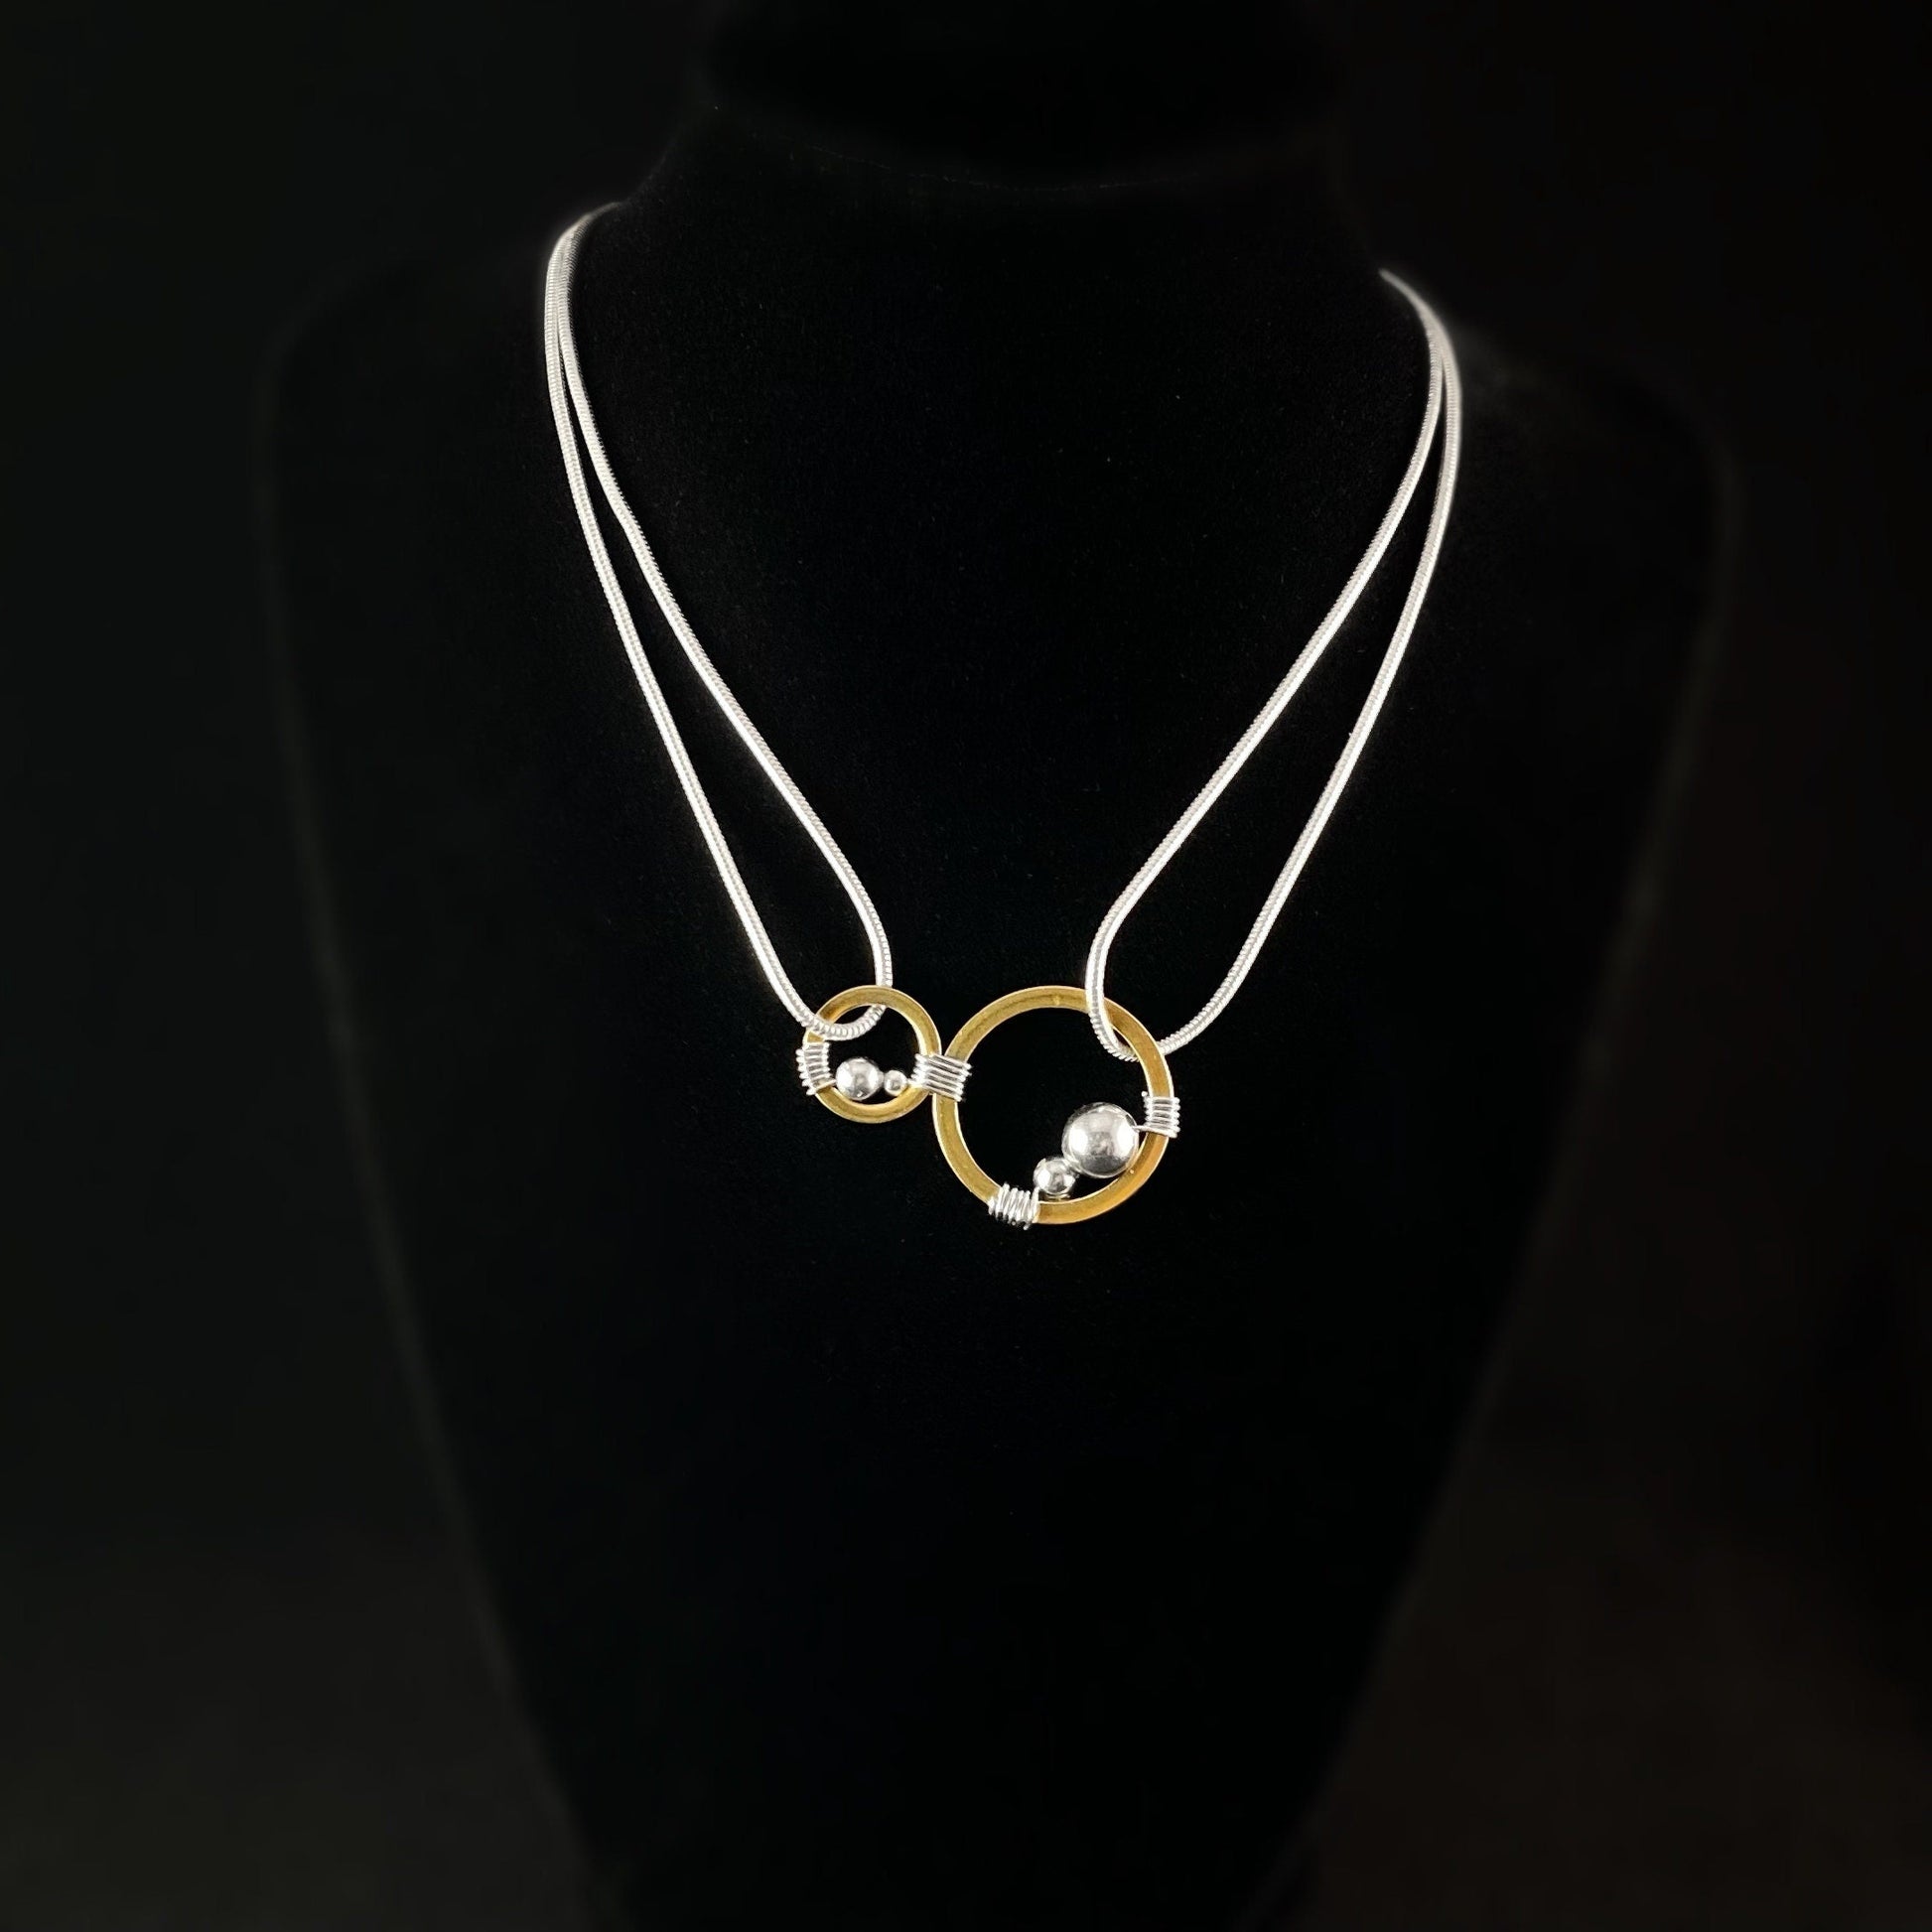 Handmade Double Circle Pendant Necklace, Made in USA